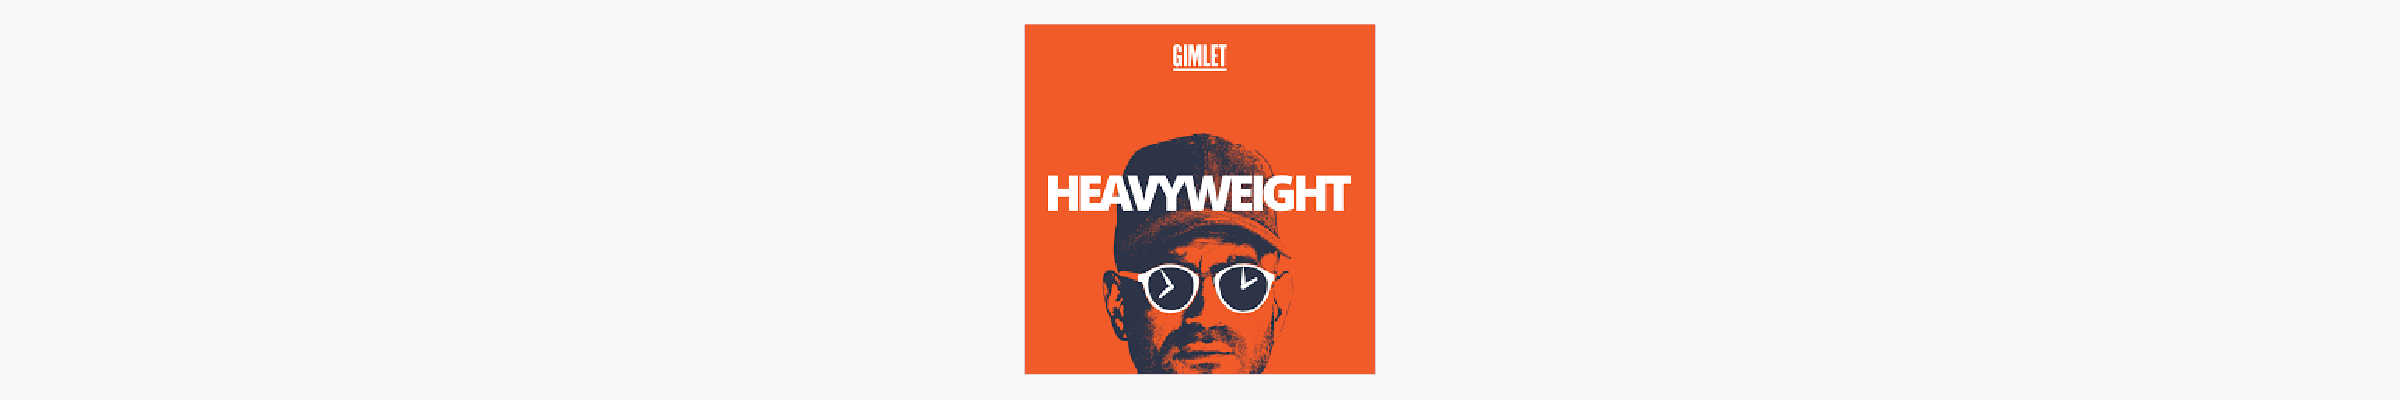 Banner showing Heavy Weight podcast